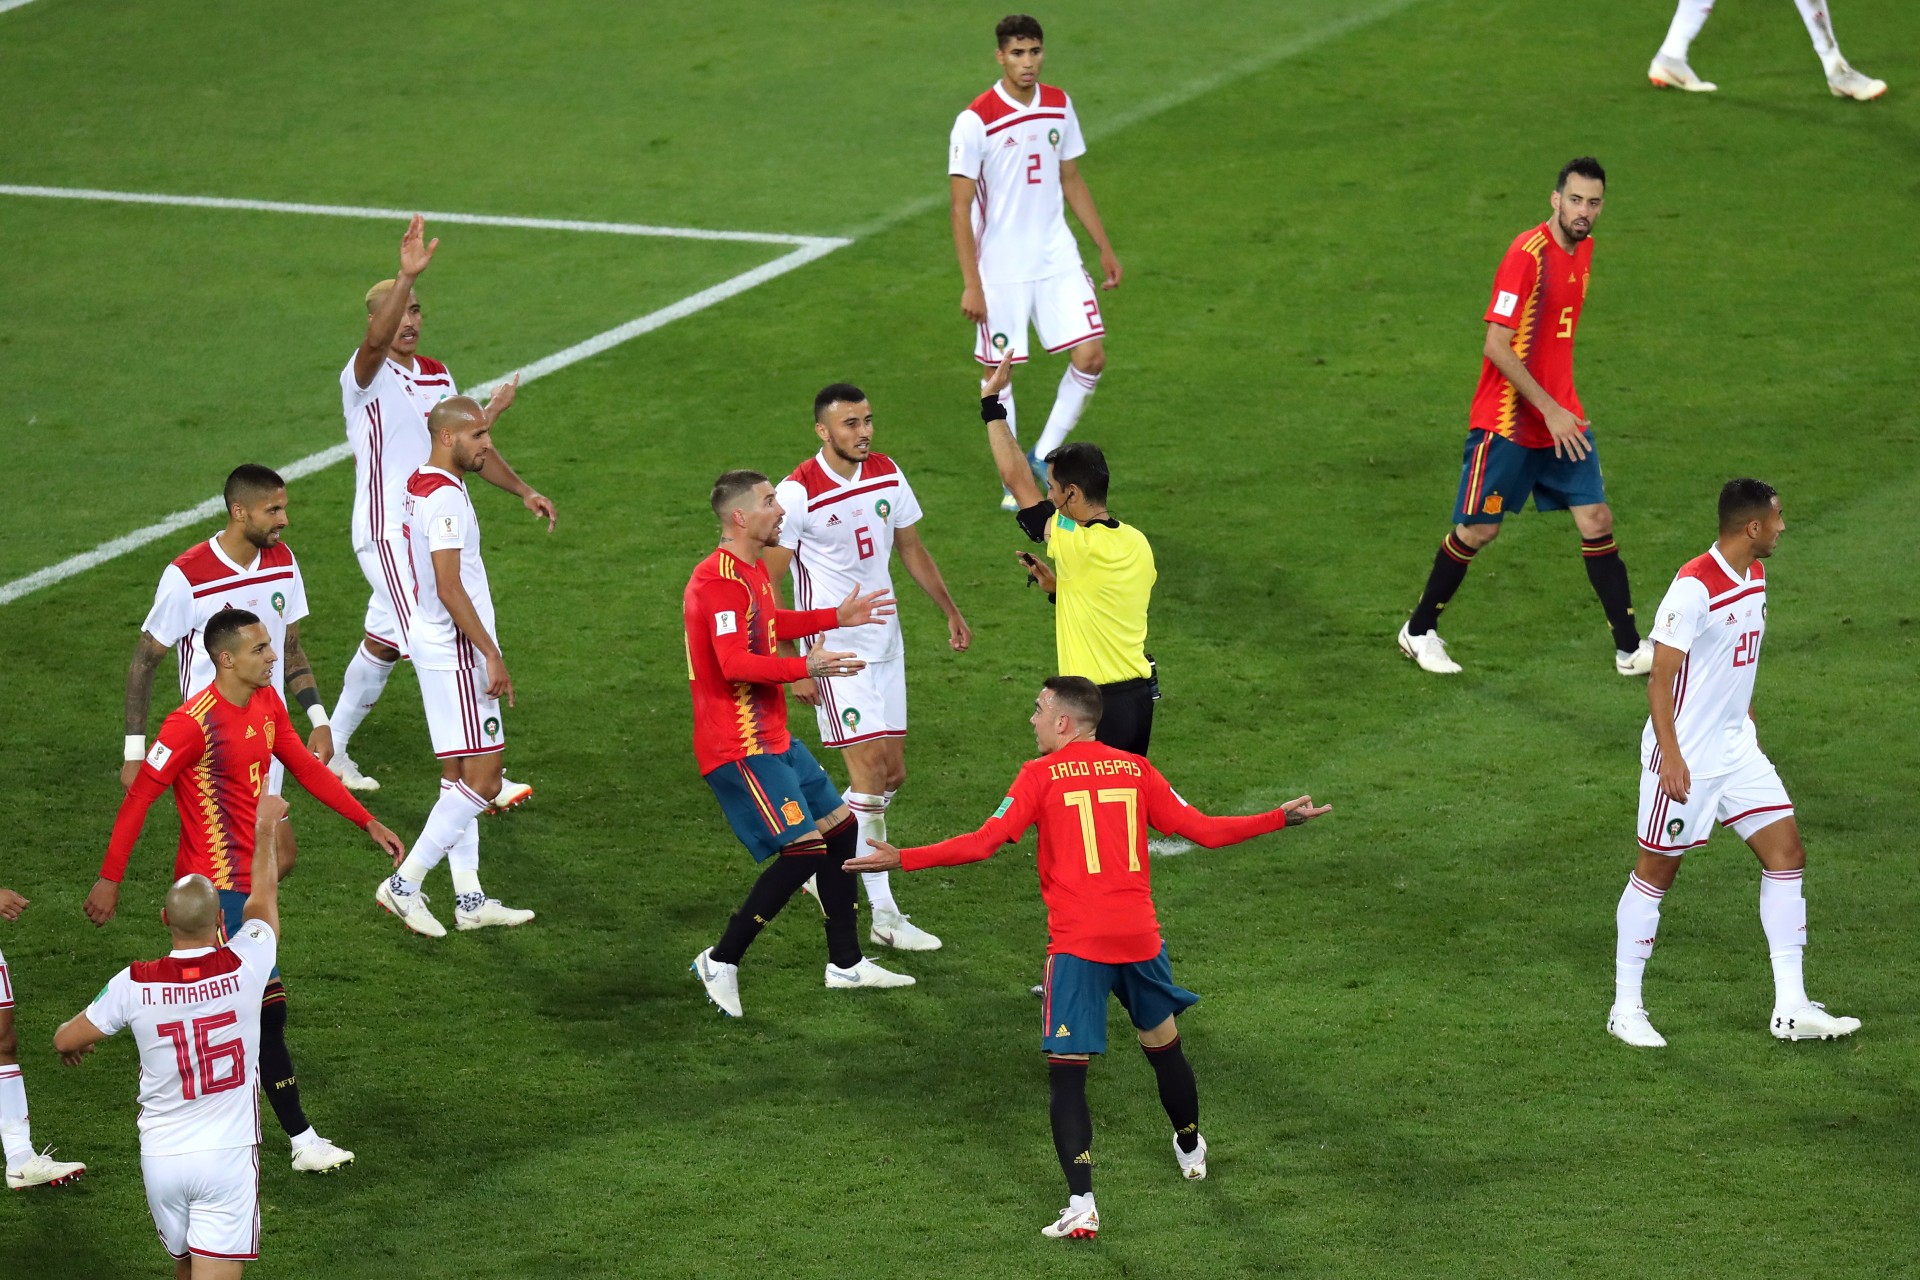 spain morocco world cup 2018 var controversy 